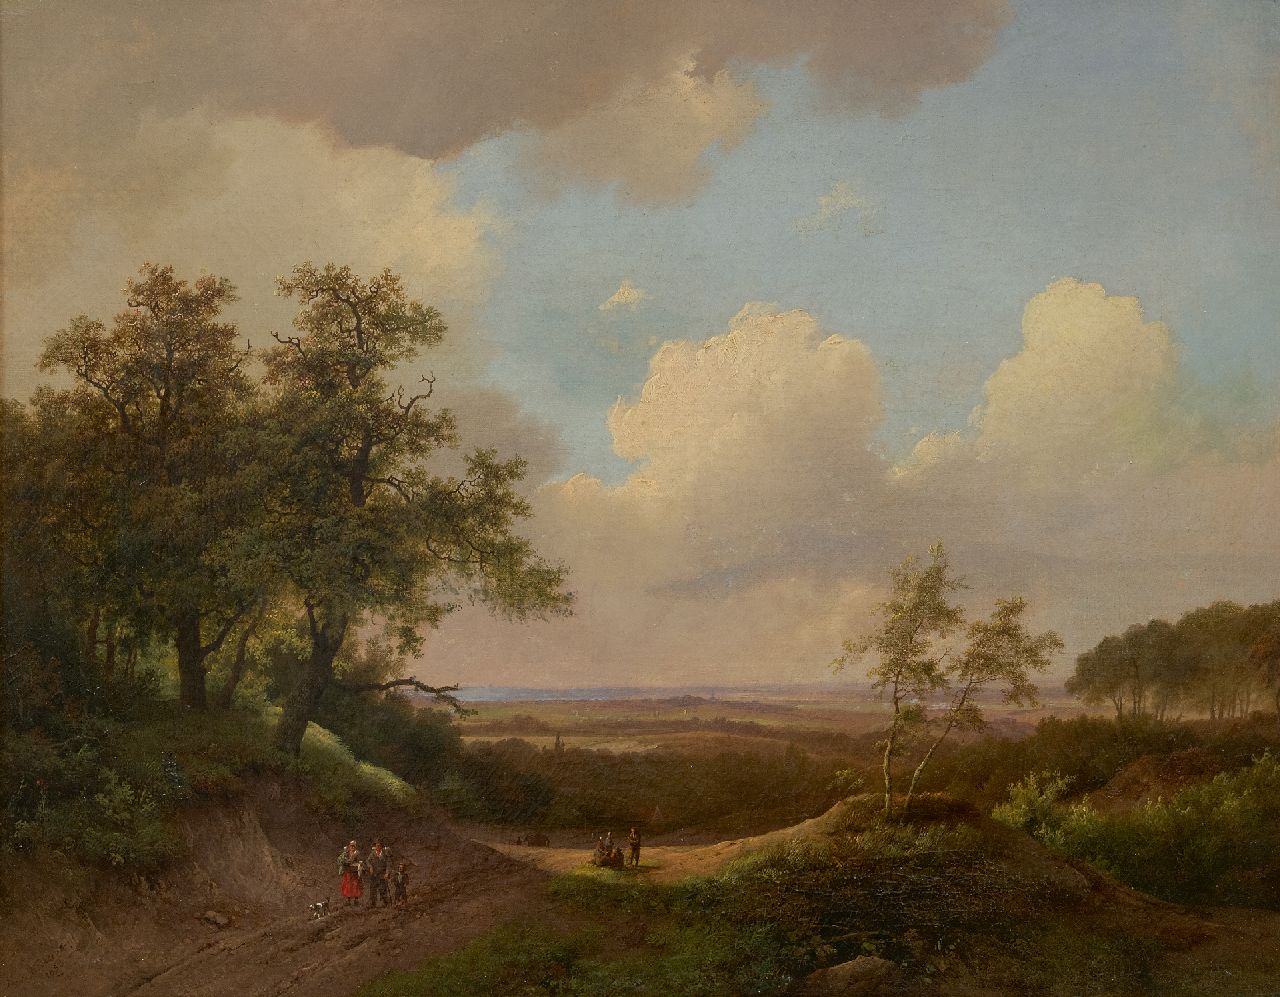 Koekkoek I M.A.  | Marinus Adrianus Koekkoek I | Paintings offered for sale | Panoramic landscape with country people, oil on canvas 51.0 x 65.0 cm, signed l.l. and dated 1850